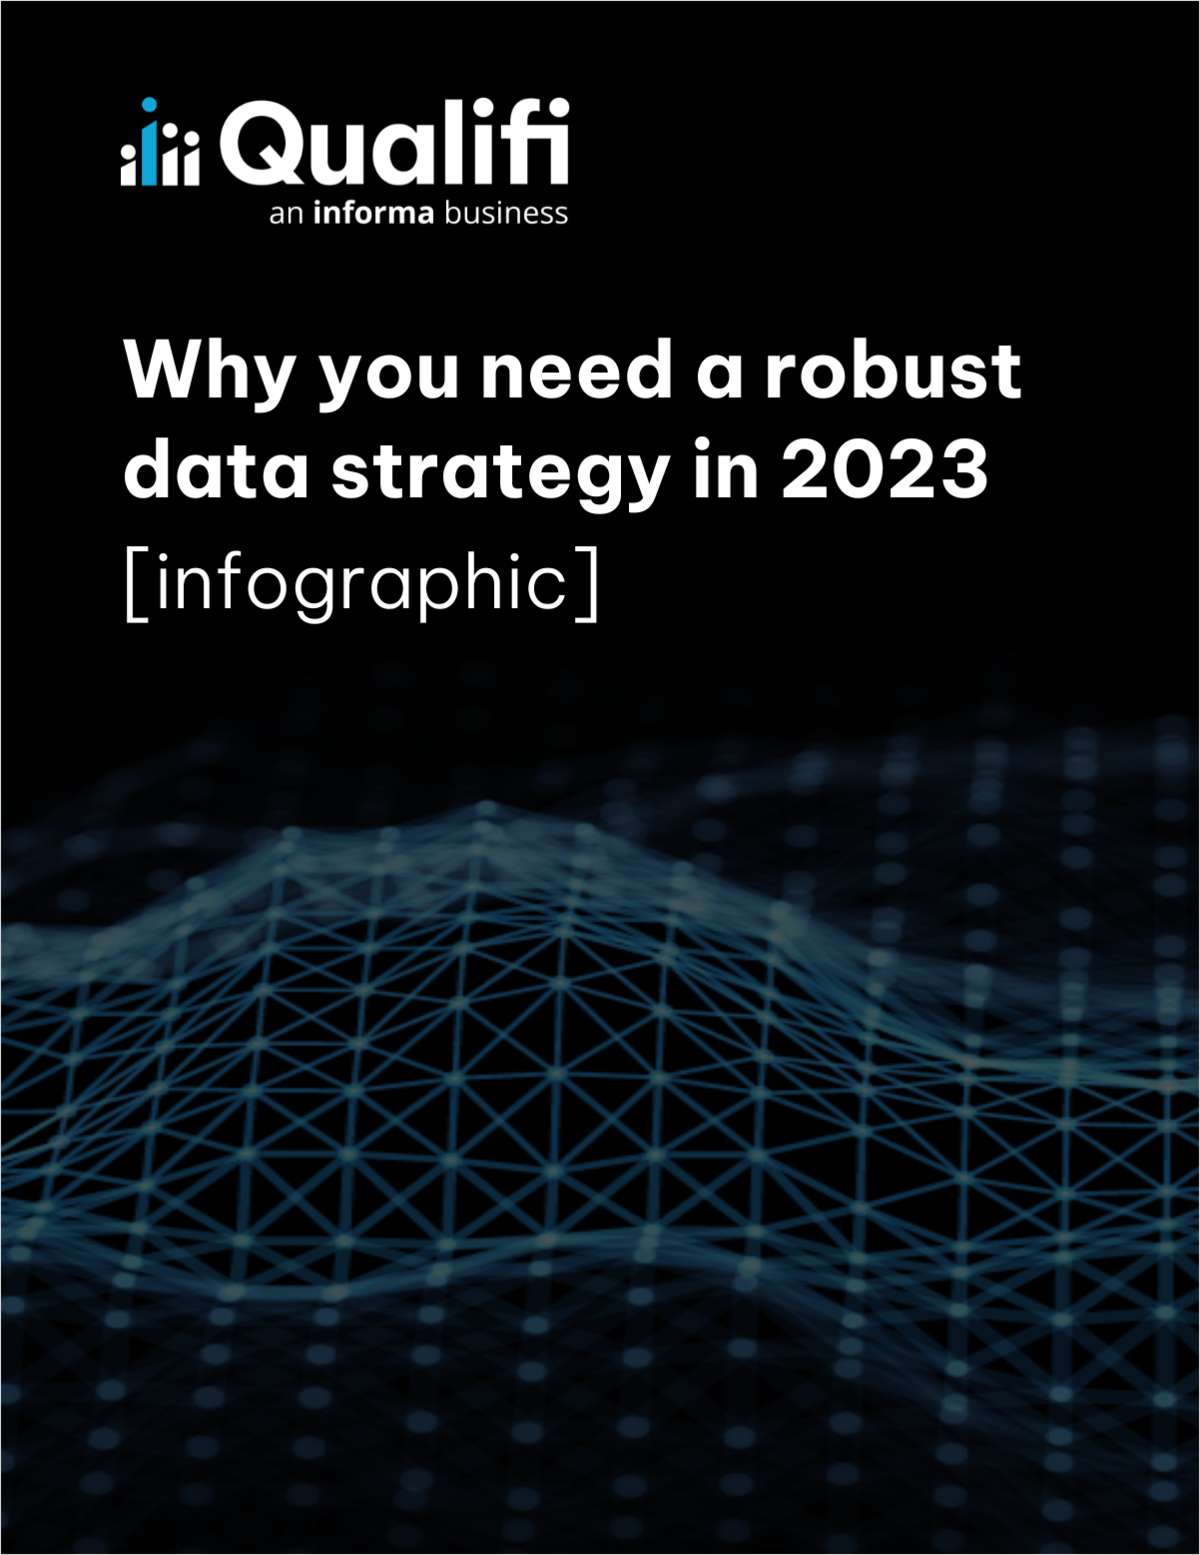 Why you need a robust data strategy in 2023